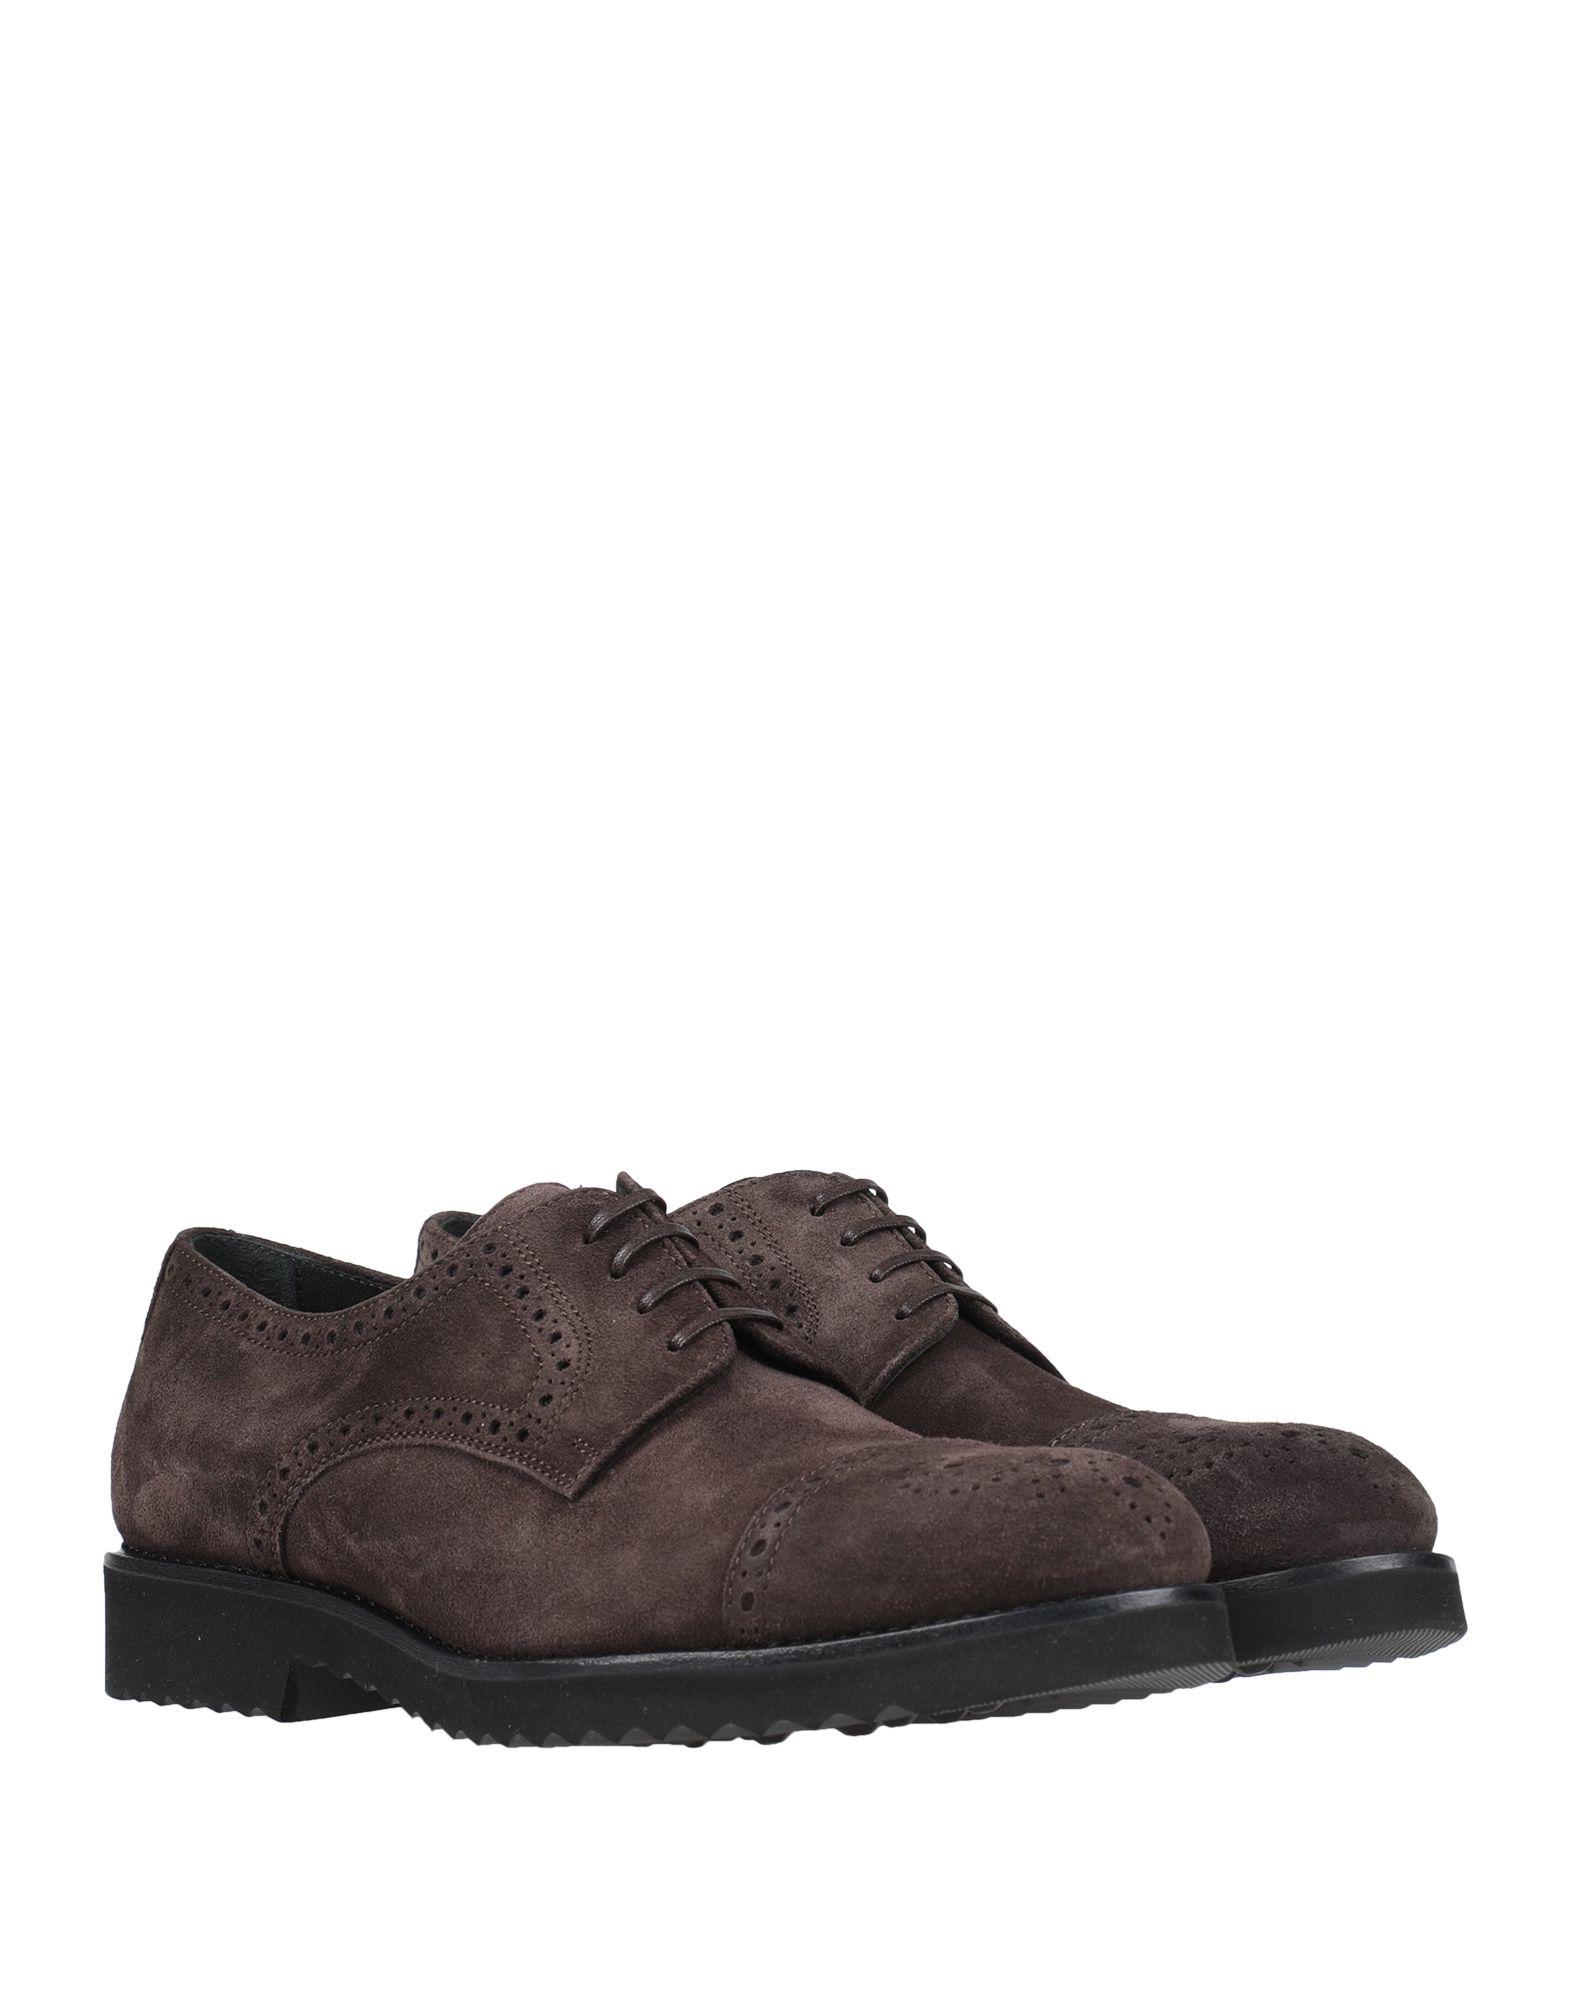 Sergio Rossi Suede Lace-up Shoe in Dark Brown (Brown) for Men - Lyst